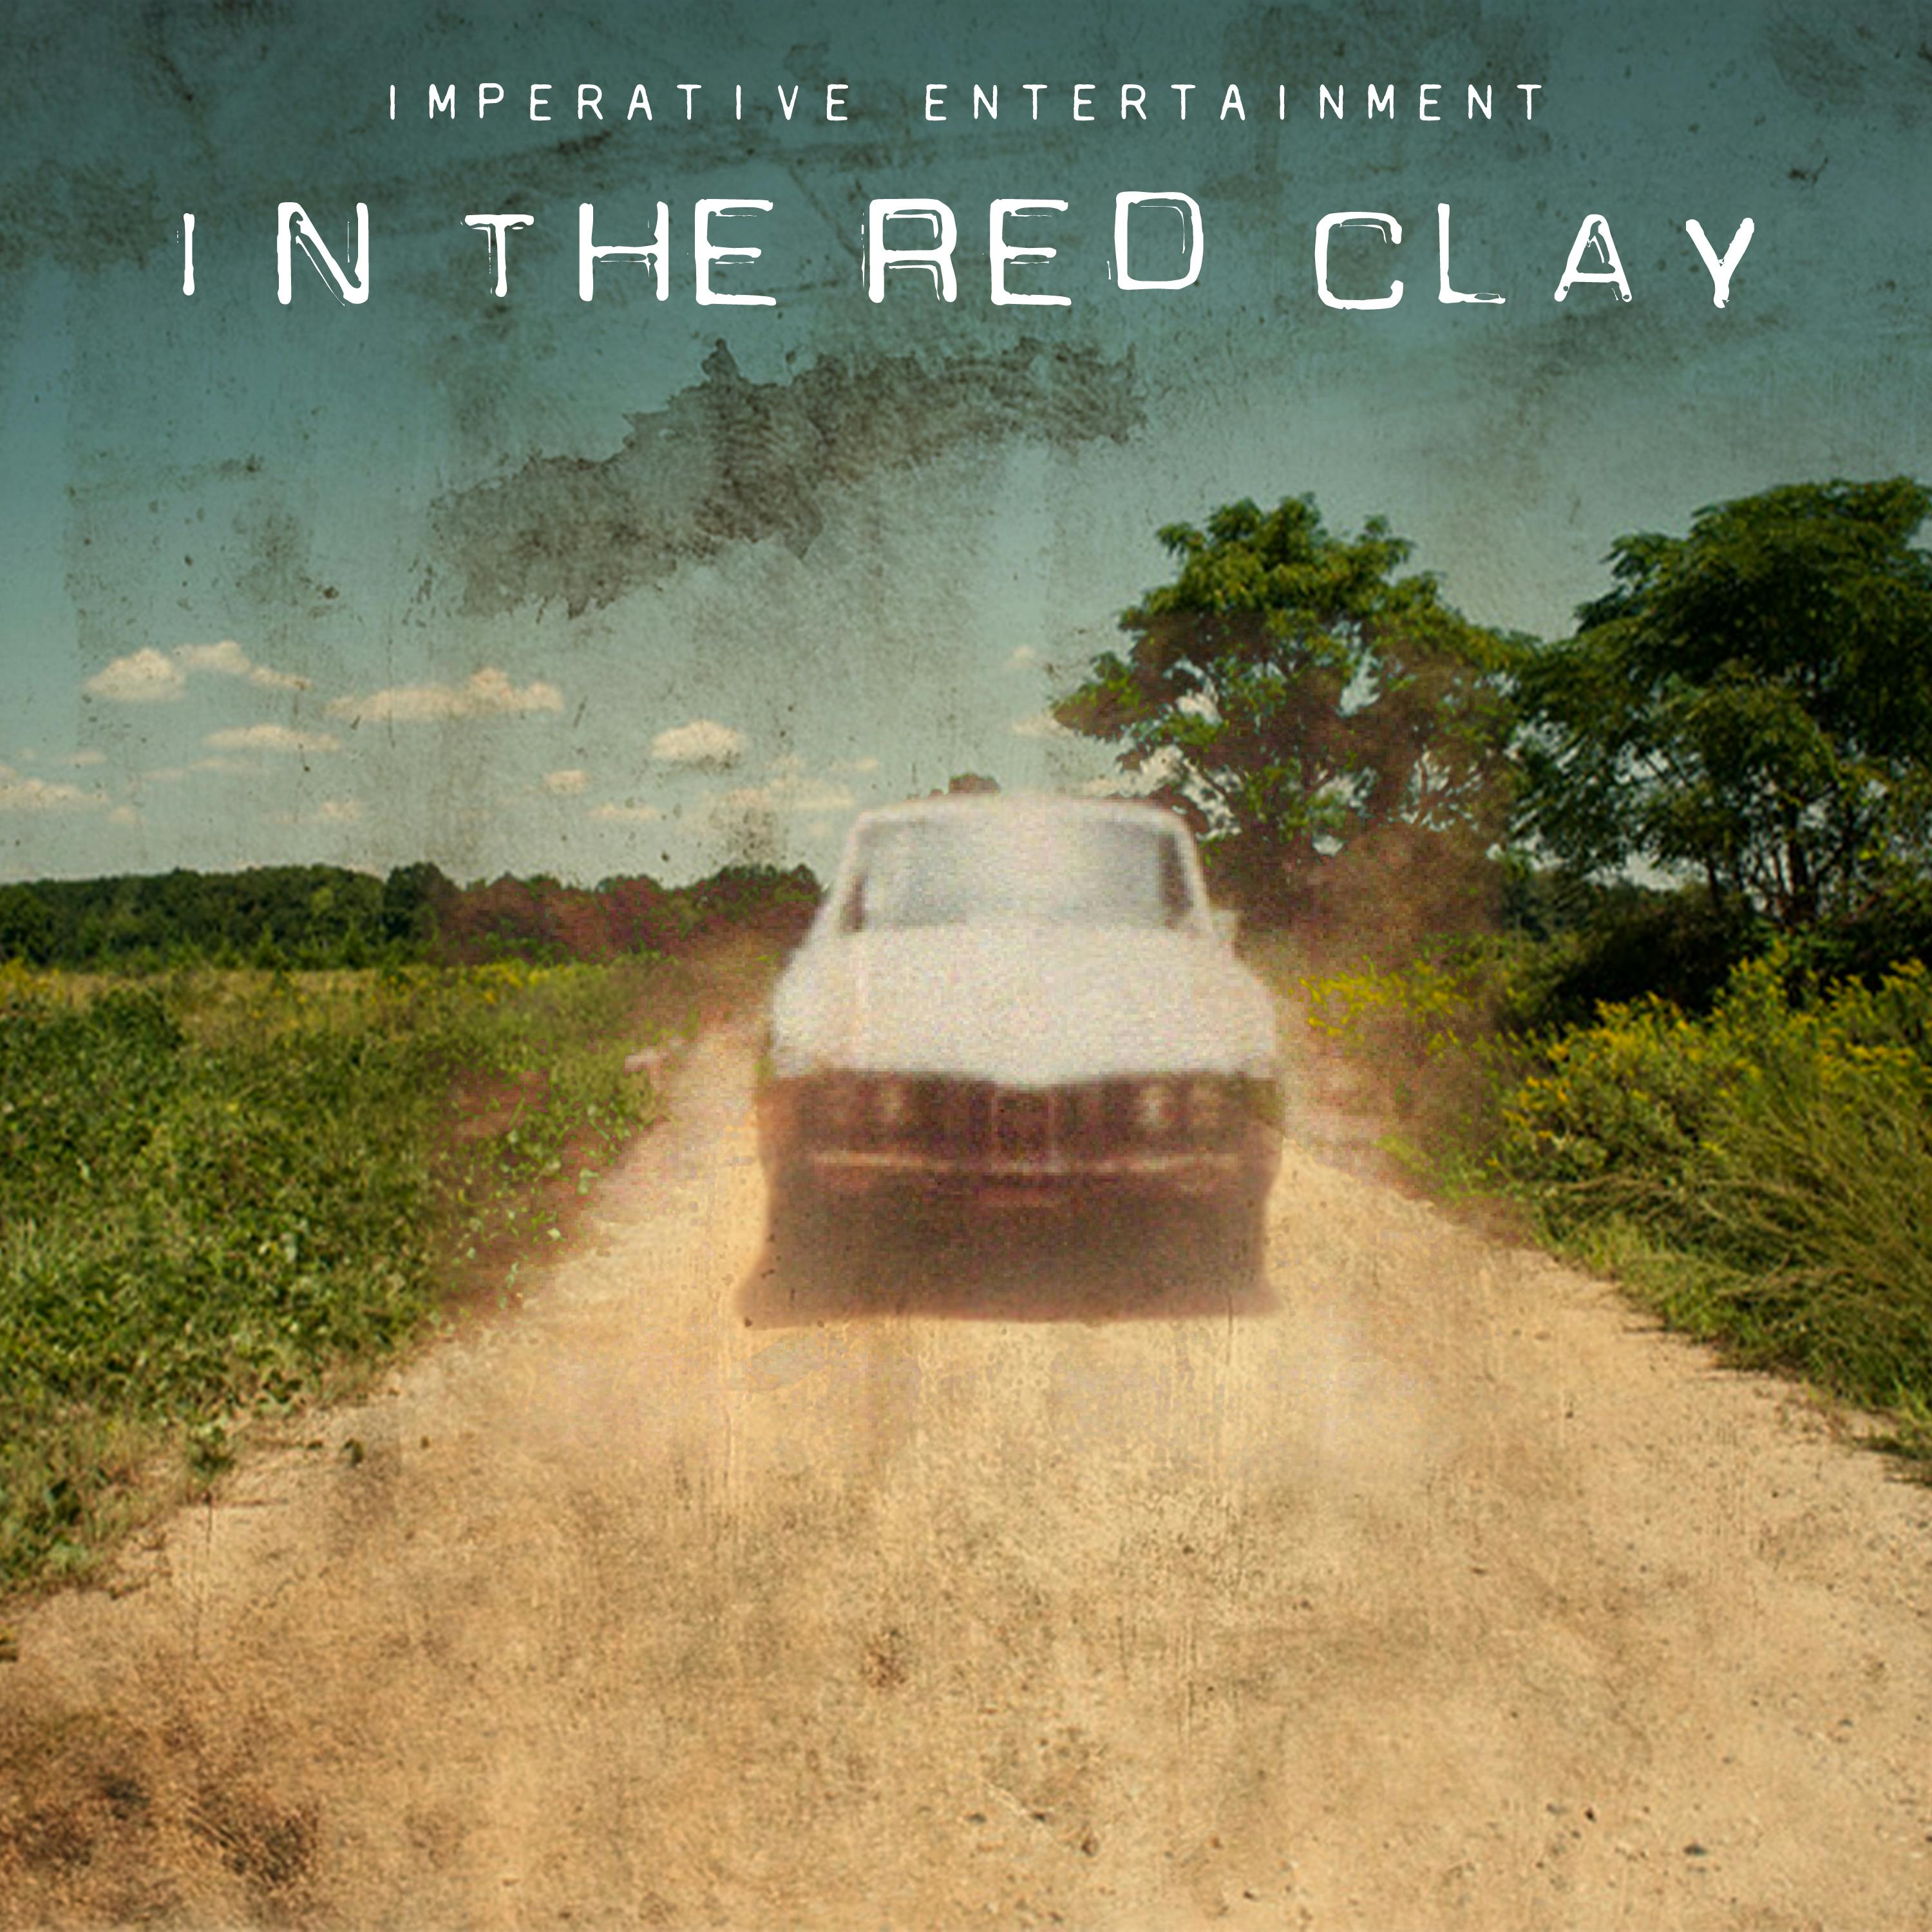 TRAILER: In the Red Clay, Season 1